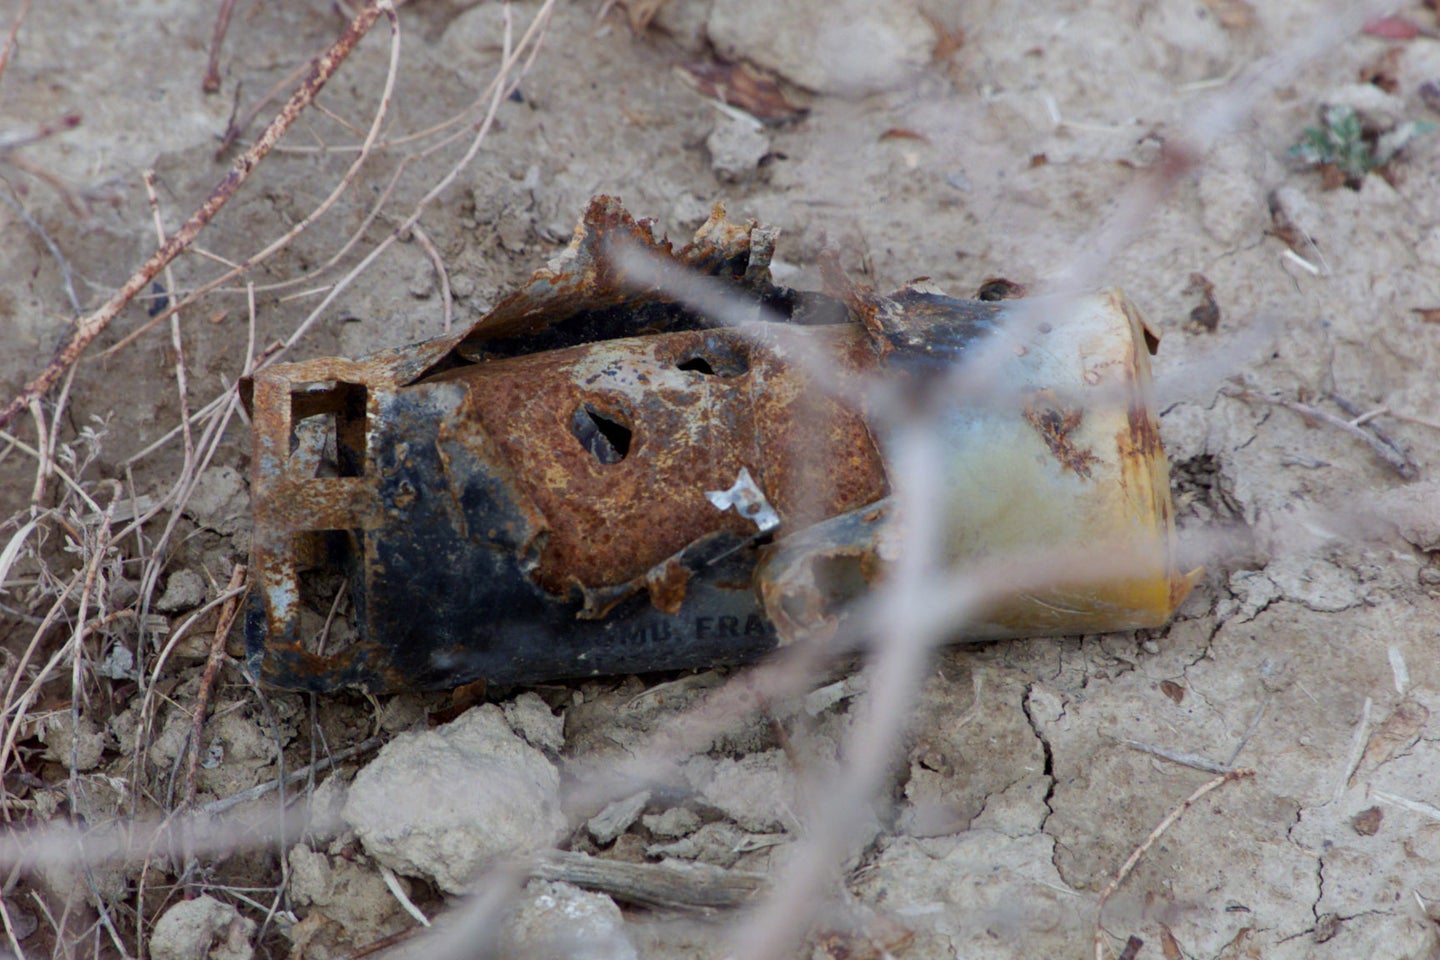 A fragment from a cluster bomb as photographed in 2002 and found near a former Taliban training camp in Afghanistan. 